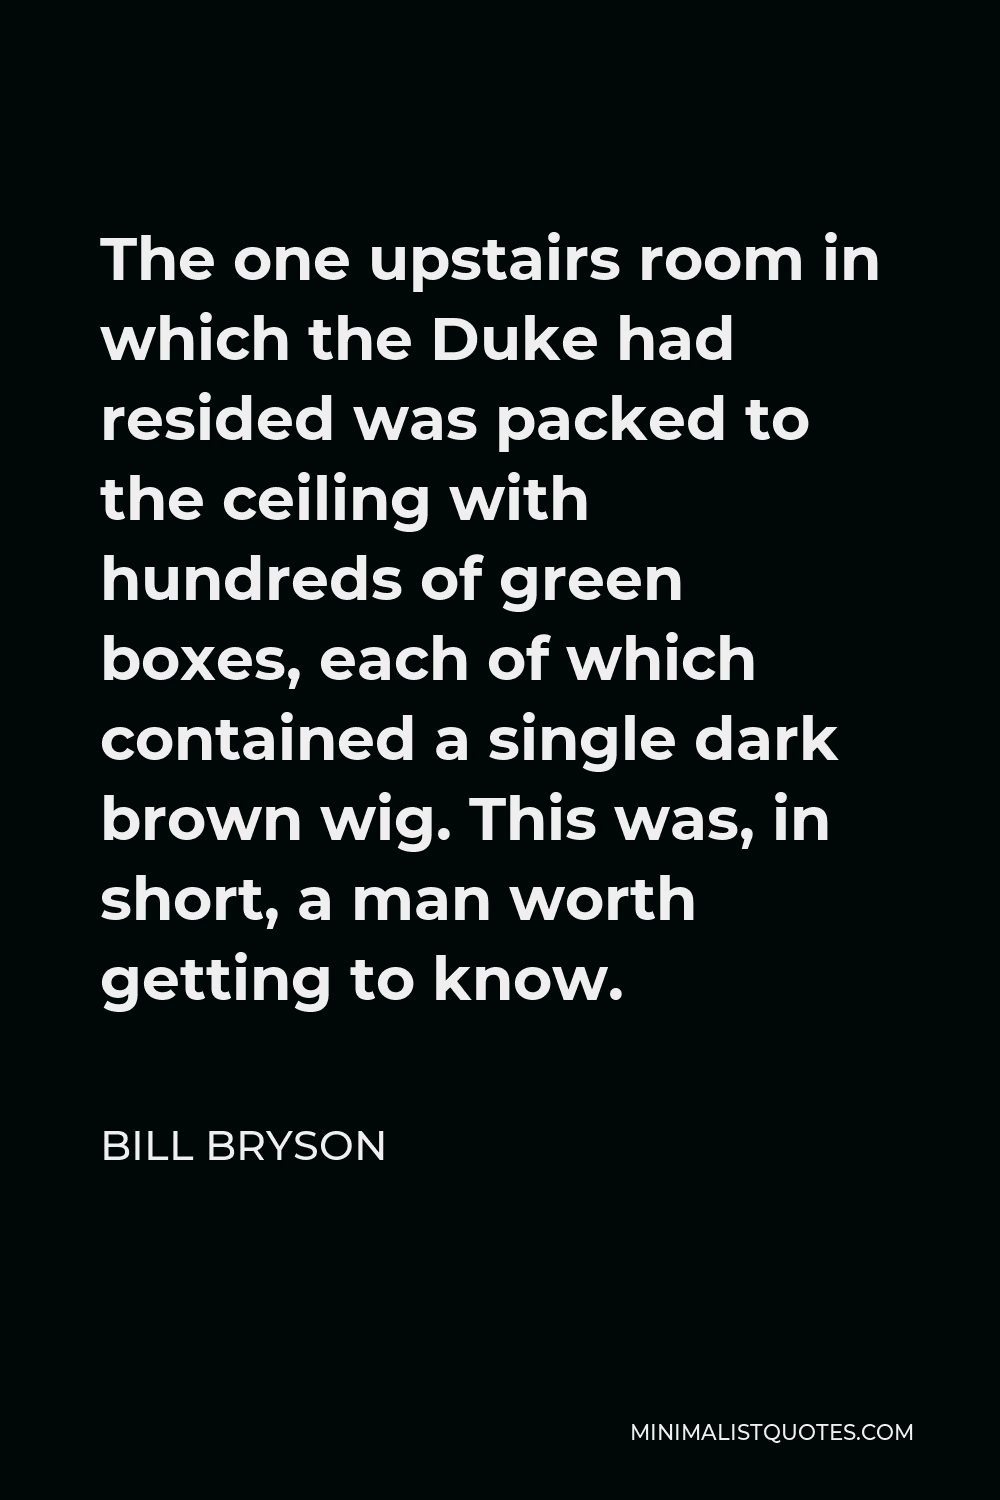 Bill Bryson Quote - The one upstairs room in which the Duke had resided was packed to the ceiling with hundreds of green boxes, each of which contained a single dark brown wig. This was, in short, a man worth getting to know.